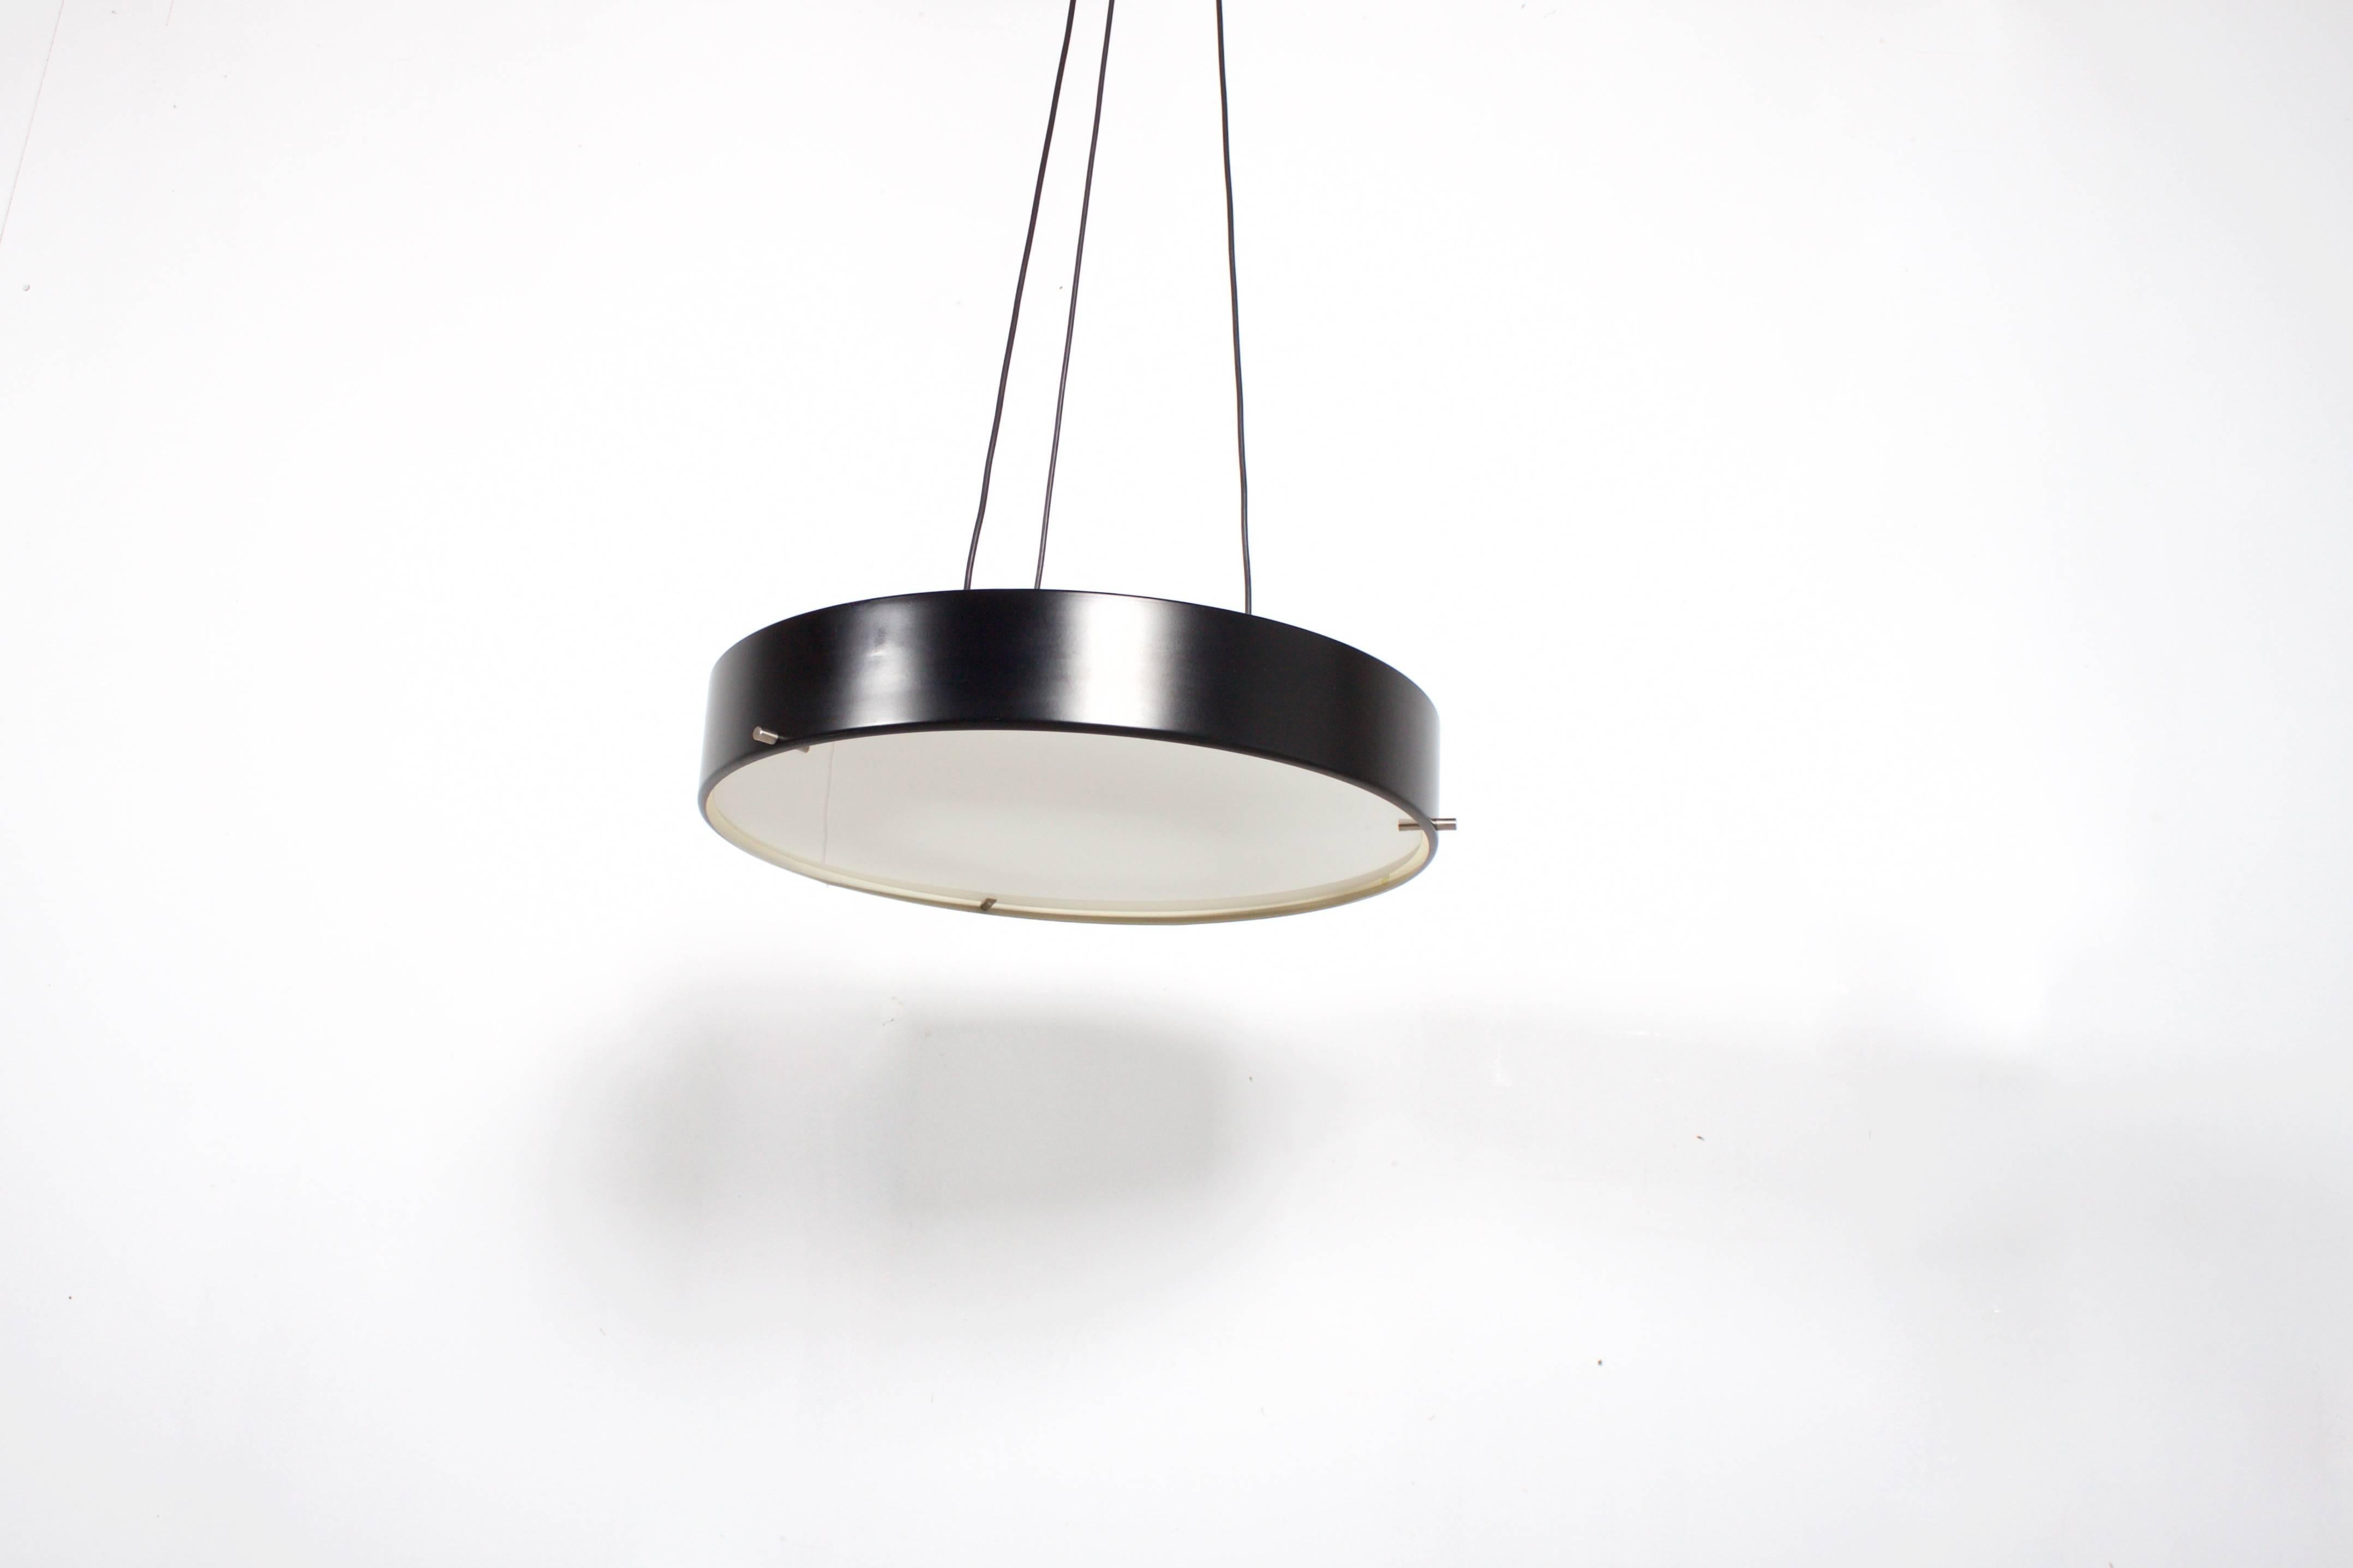 Rare Stilnovo Gatta 1090 Pendant in very good original condition.

Design: Bruno Gatta

Marked: Stilnovo 

Black lacquered aluminum shade which holds a large opaline diffuser by three nickel pens.

The lamp hangs on three electrical wires which are